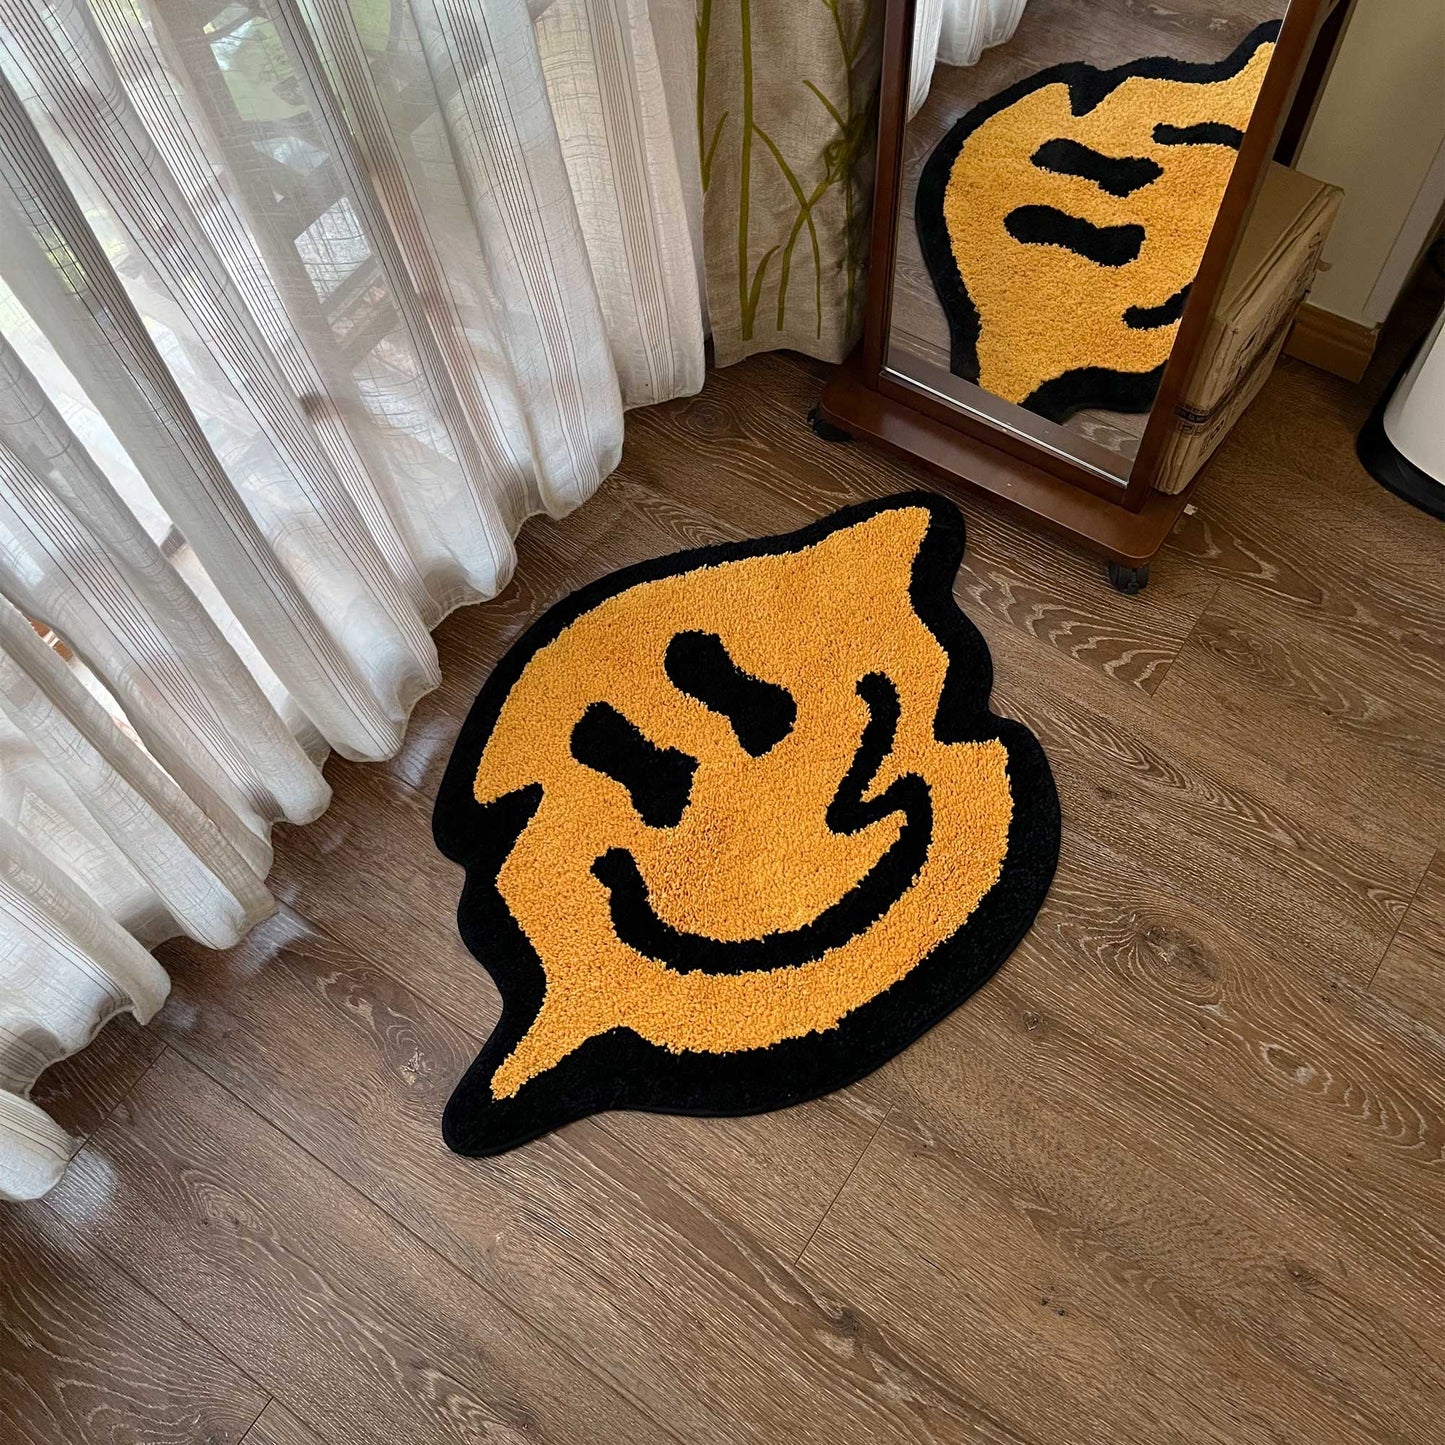 Tufted Rug Melted Smiley Face Rug Overhead